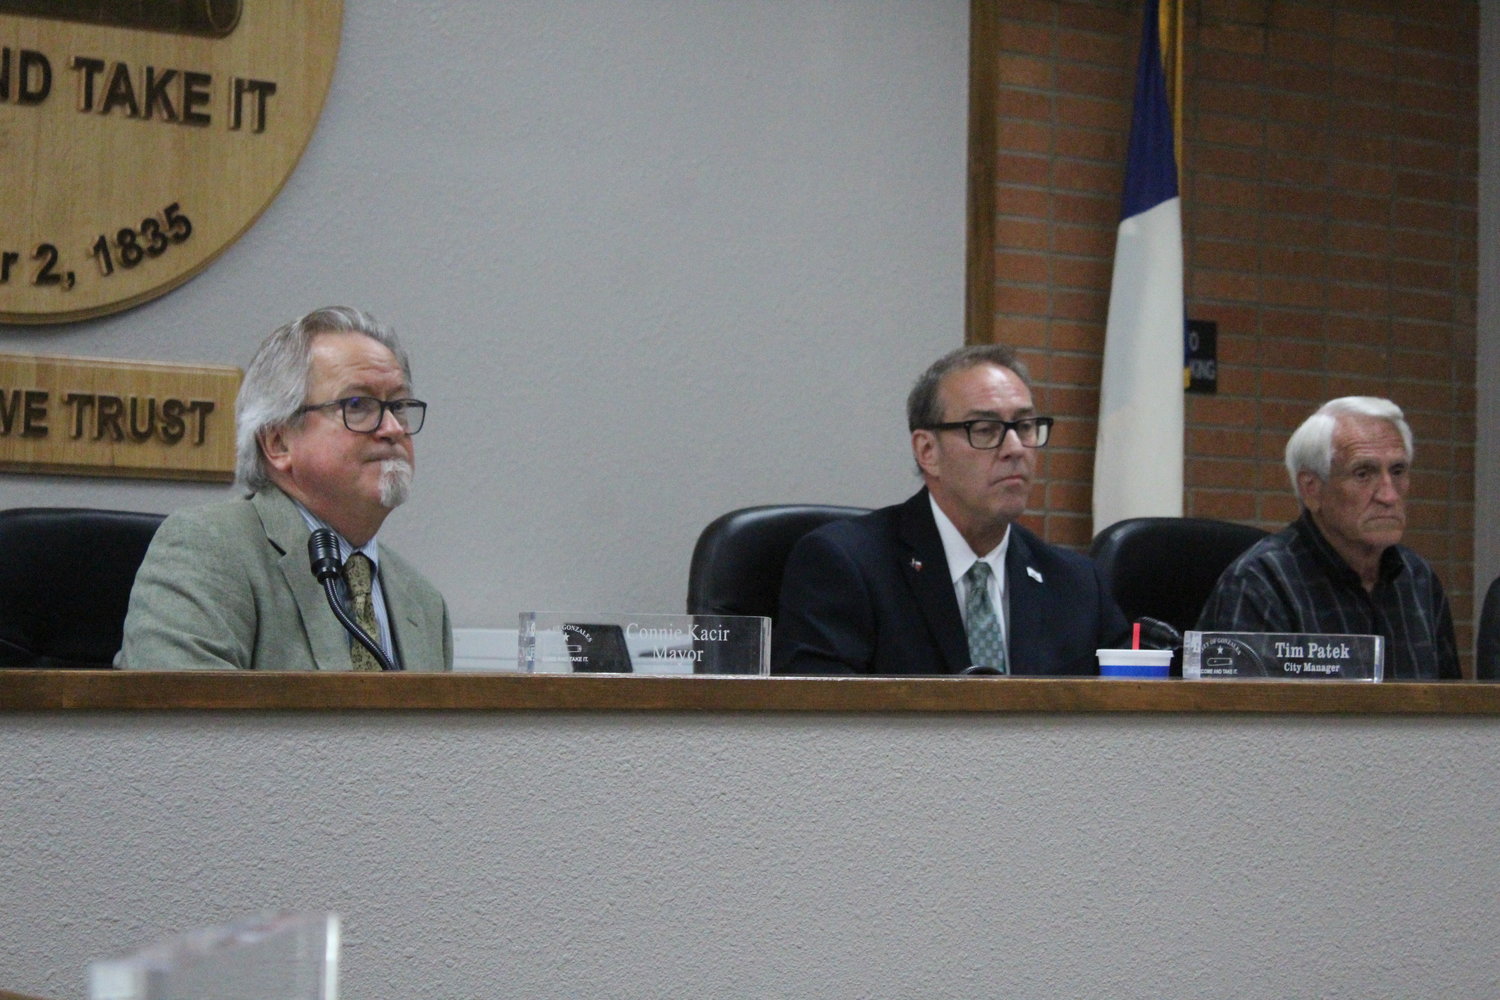 Mayor S.H. “Steve” Sucher next to the City Manager Tim Patek and Councilman Bobby O’Neal for their first meeting together Tuesday, June 21.